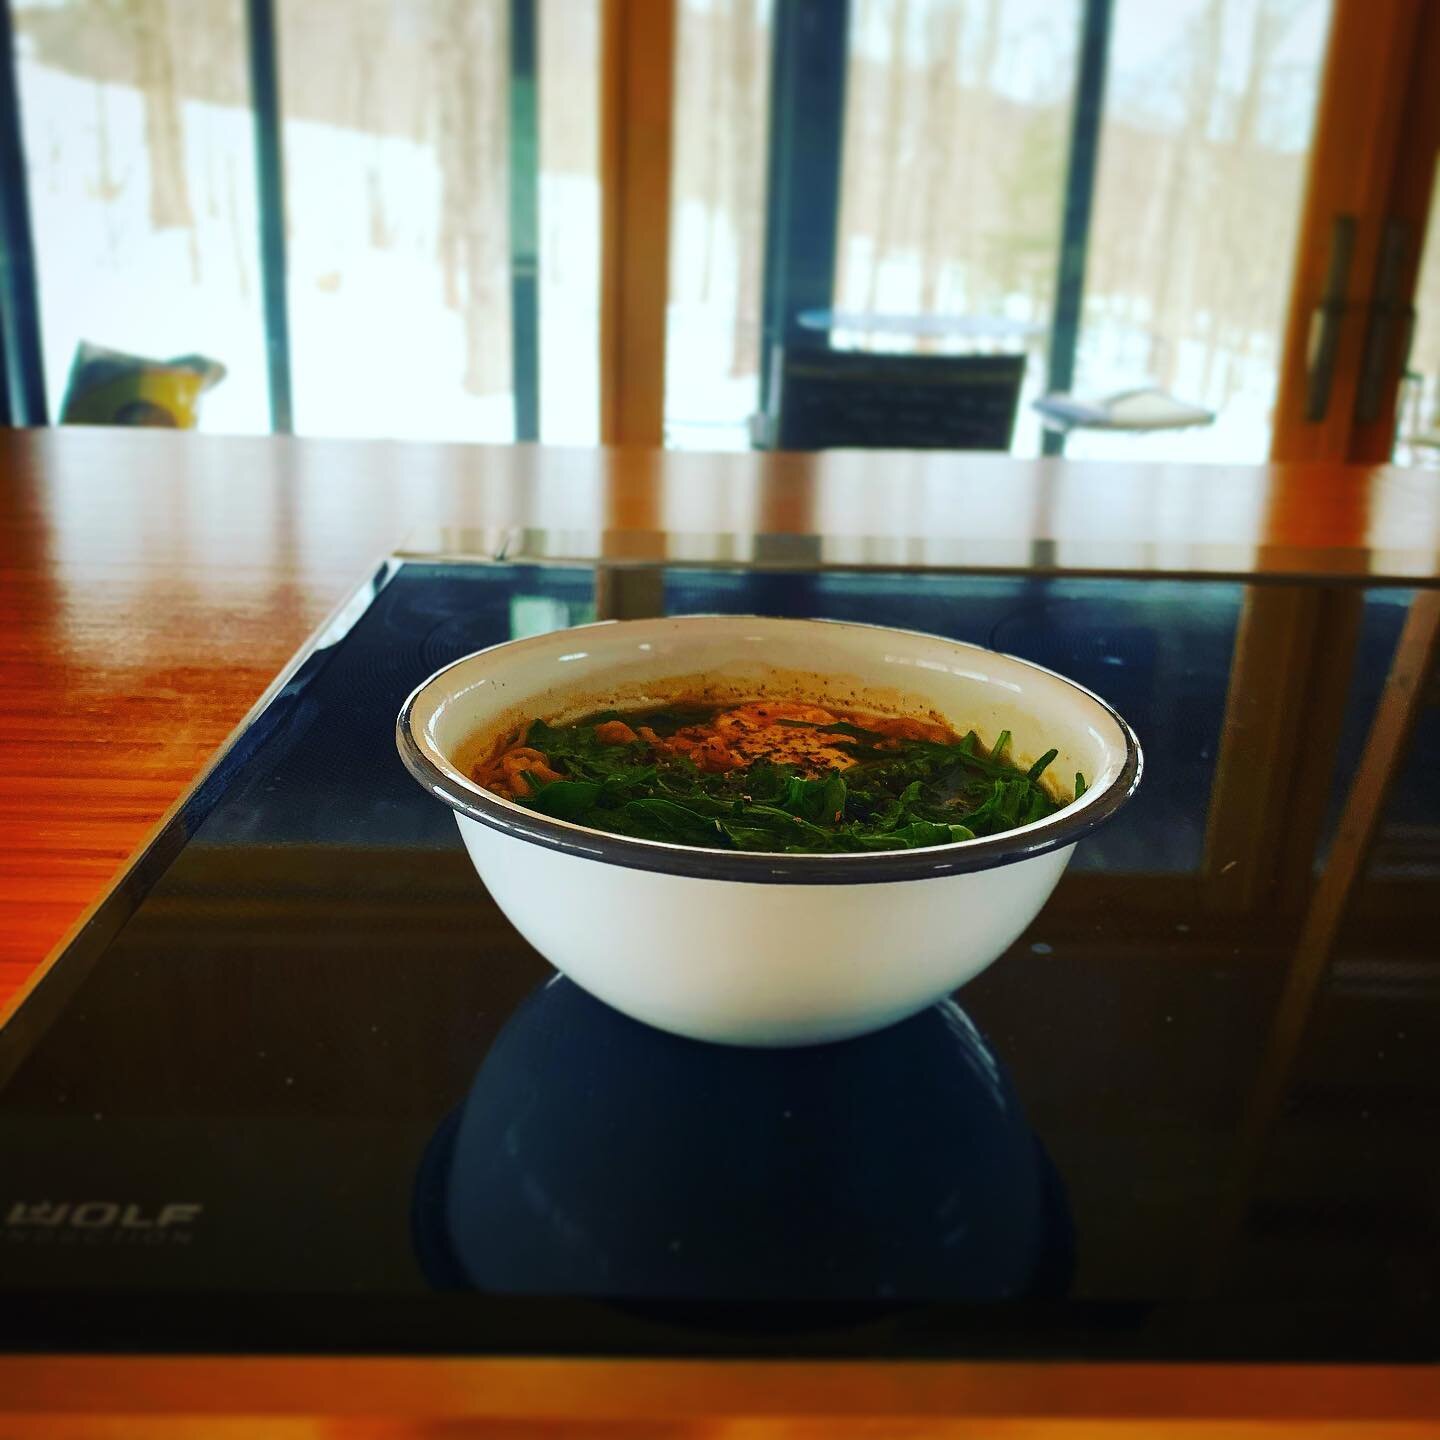 One person ramen noodle cooking. Recently, I discovered that I can cook in my enamel bowls. Quick to prepare, quick to clean up! #enamelcookware #enamelware #enamelcampingcup #campcooking #merri #lazyideas #ecofriendlycooking